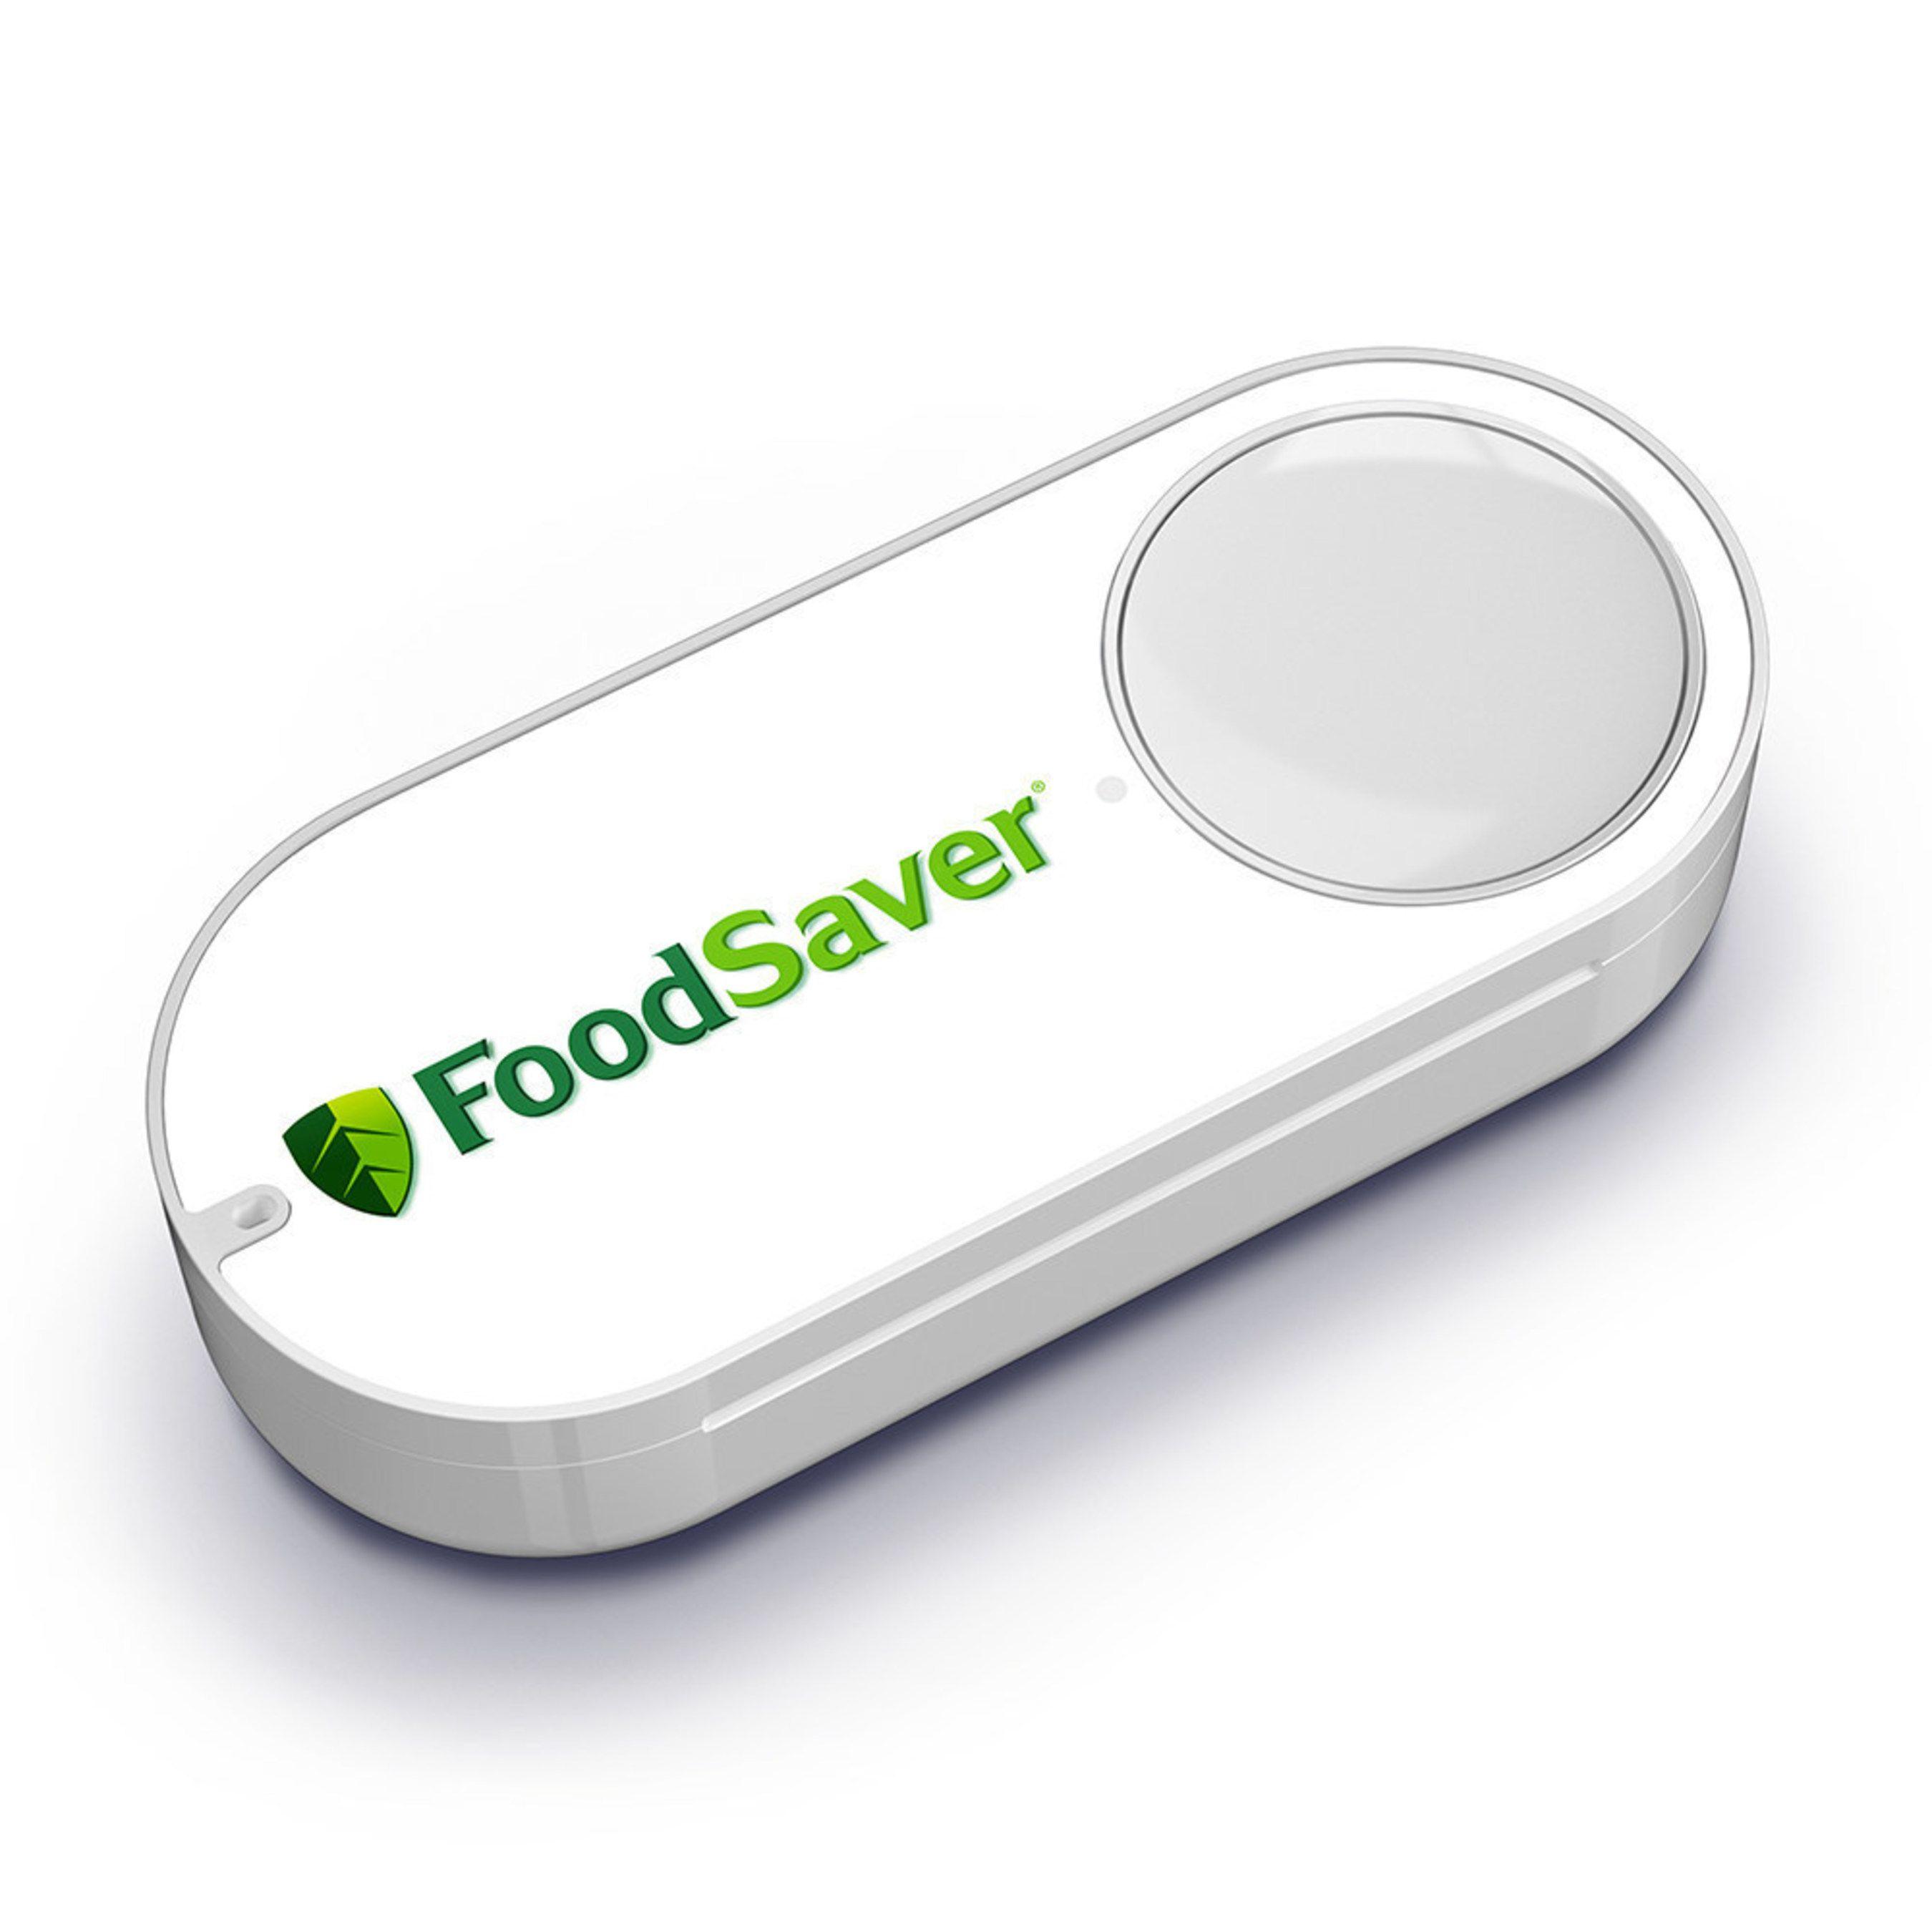 FoodSaver Logo - The FoodSaver® Brand Announces Easier Ordering with Amazon Dash Button